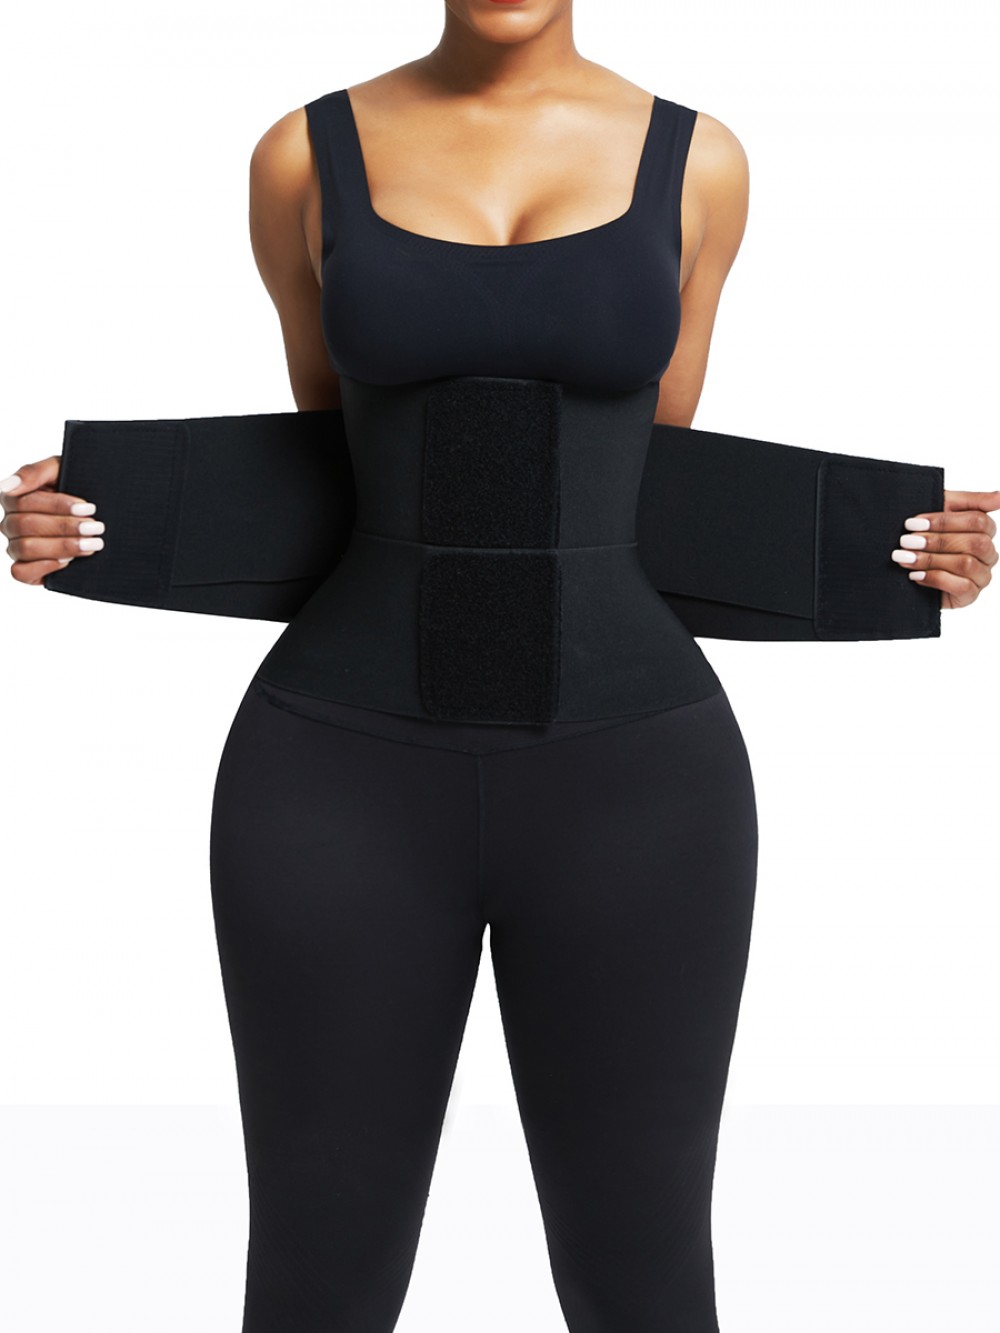 Rose Red Plus Waist Trainer With Straps Contrast Color Lose Weight